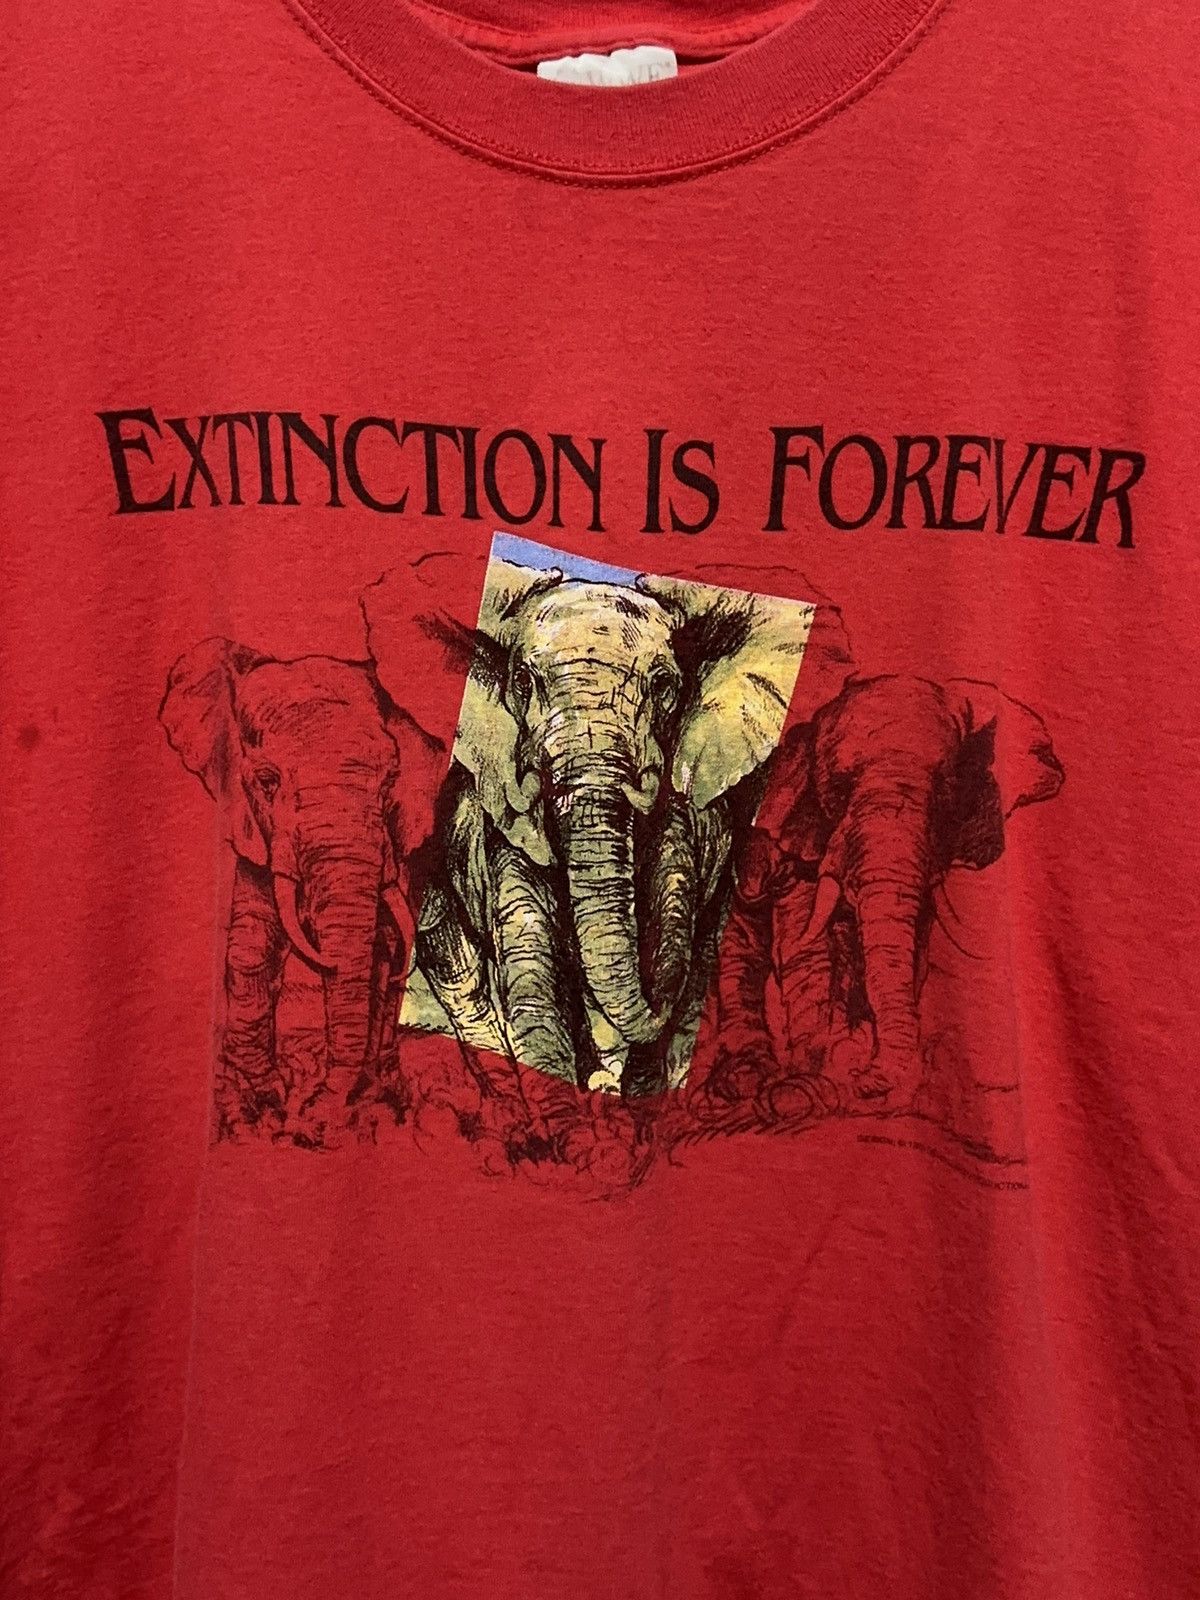 Vintage - The 90s WWF Extinction Is Forever Nature Graphic Tee XL - 3